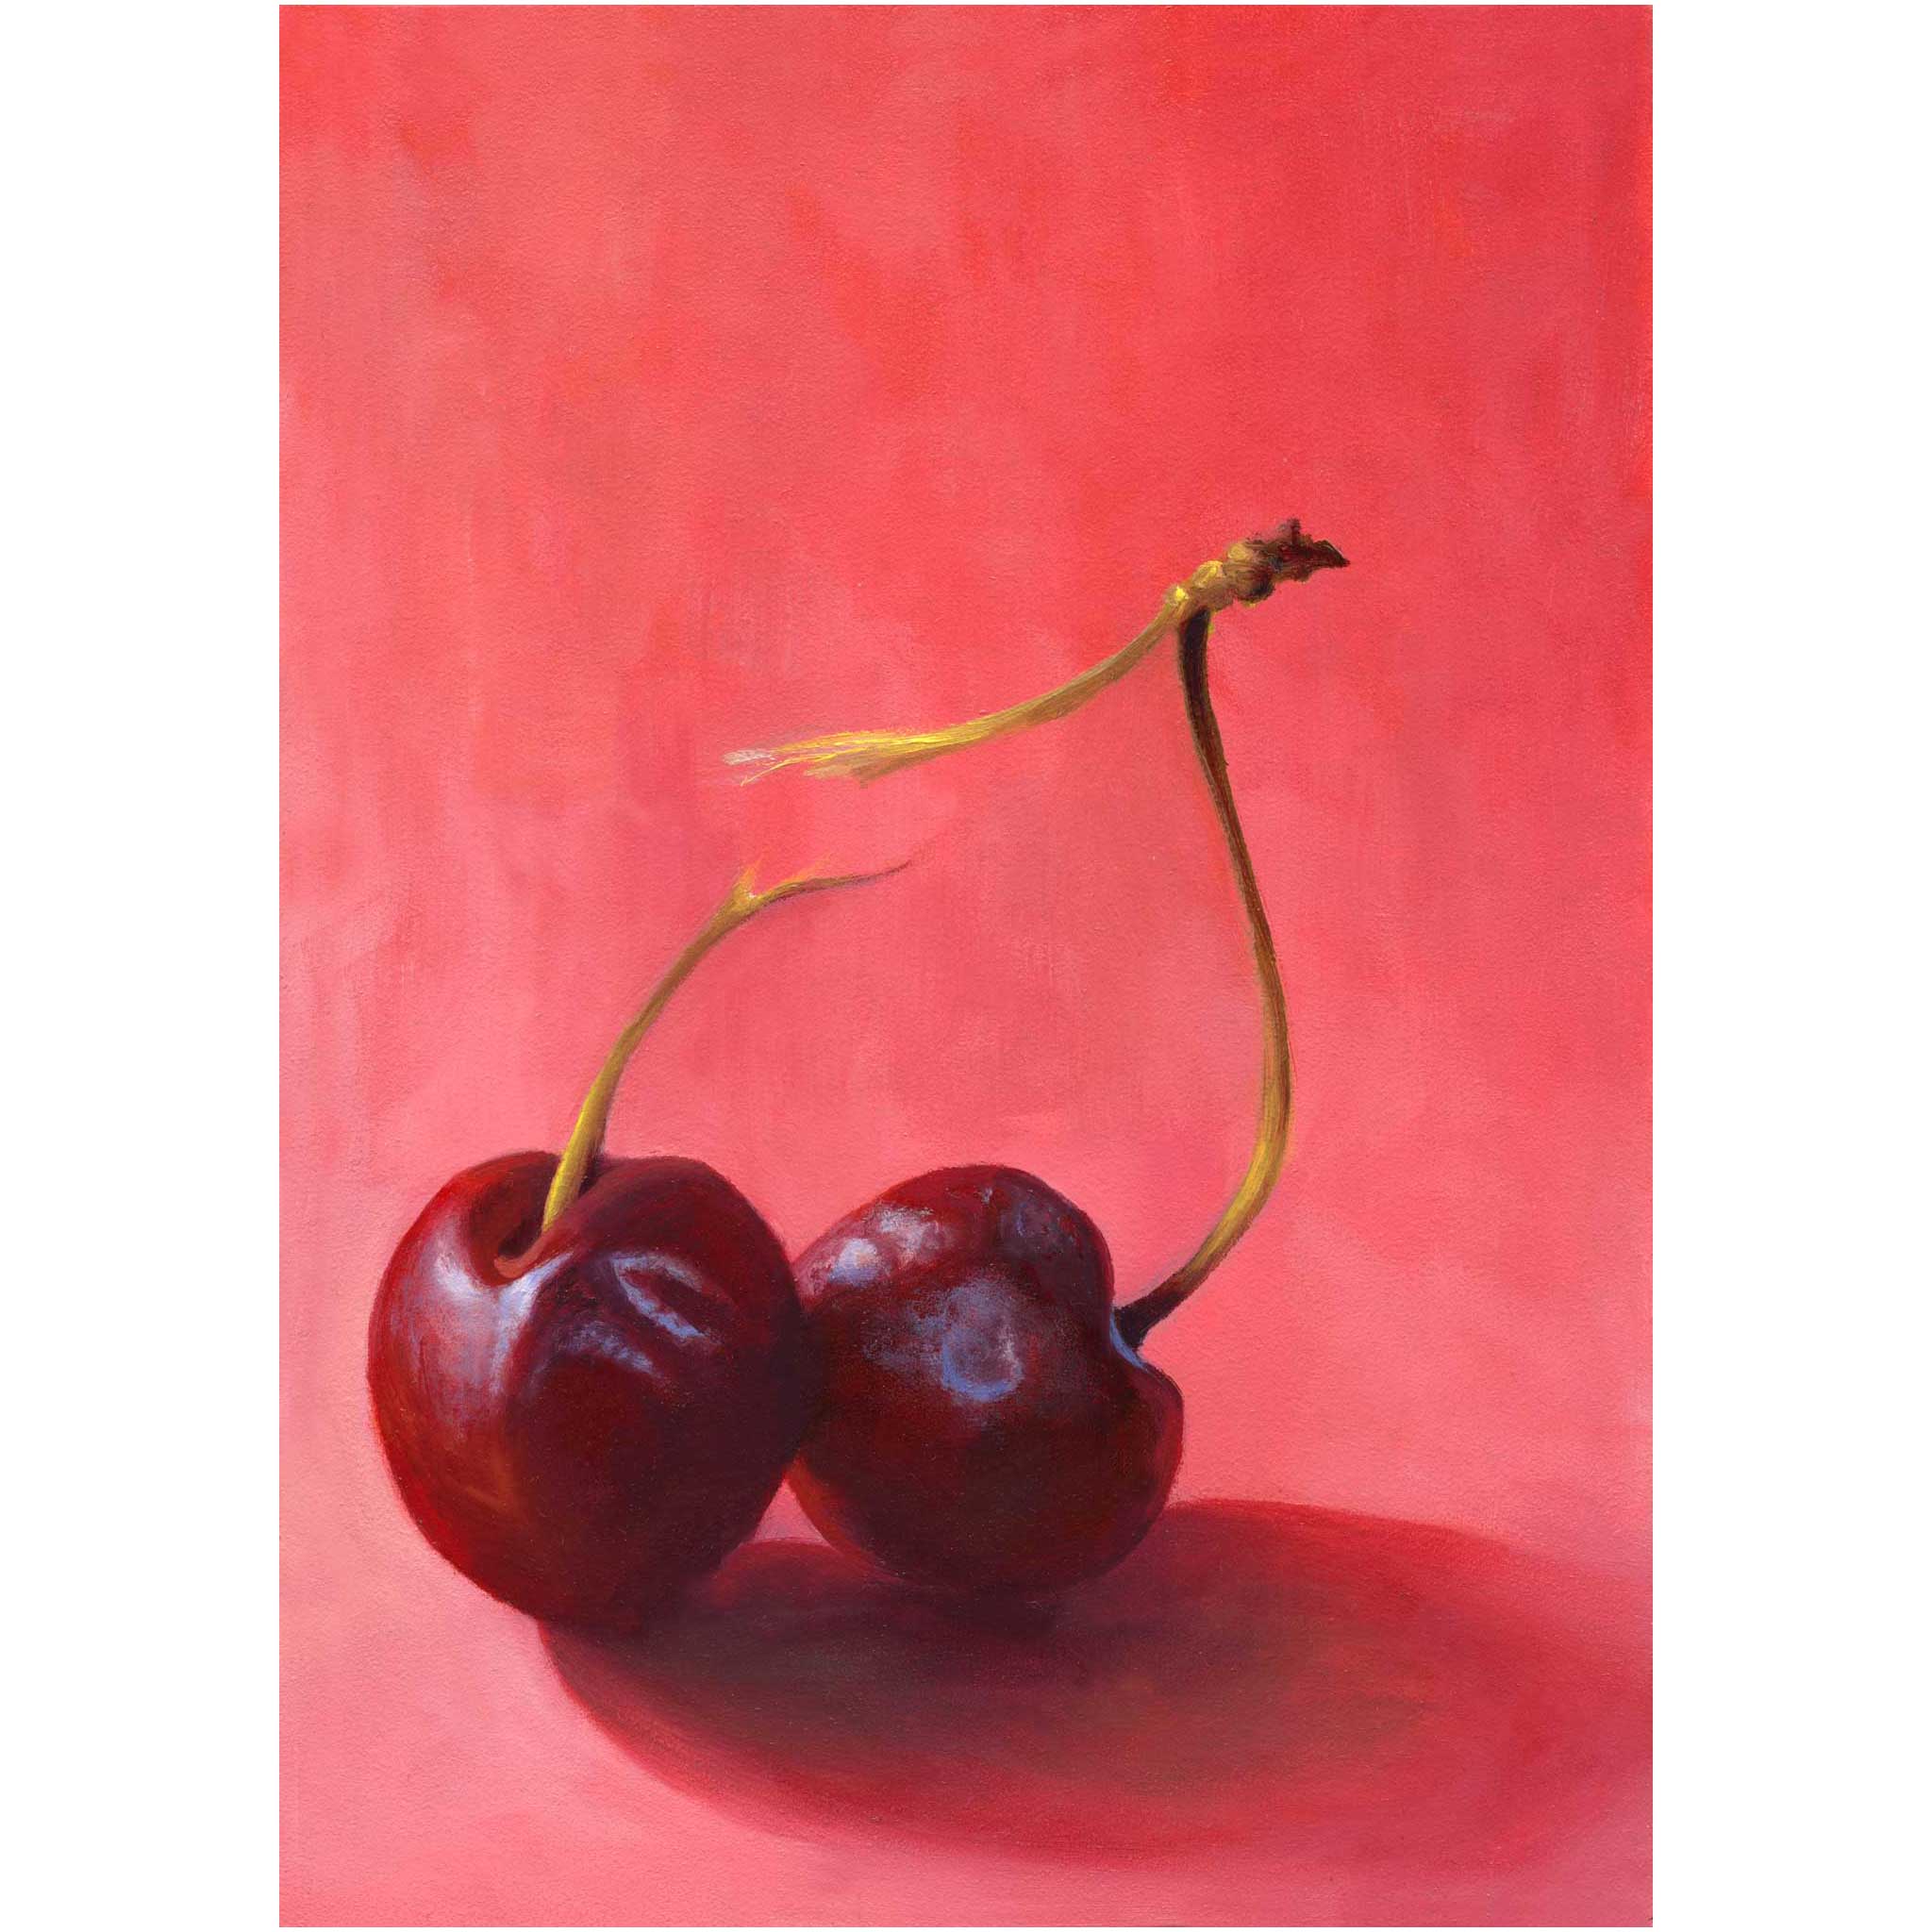 Two dark burgundy red cherries on a deep rose pink background, their apple green stem is split. This is a giclee art print of my original fruit still life oil painting by artist Jo Bradney